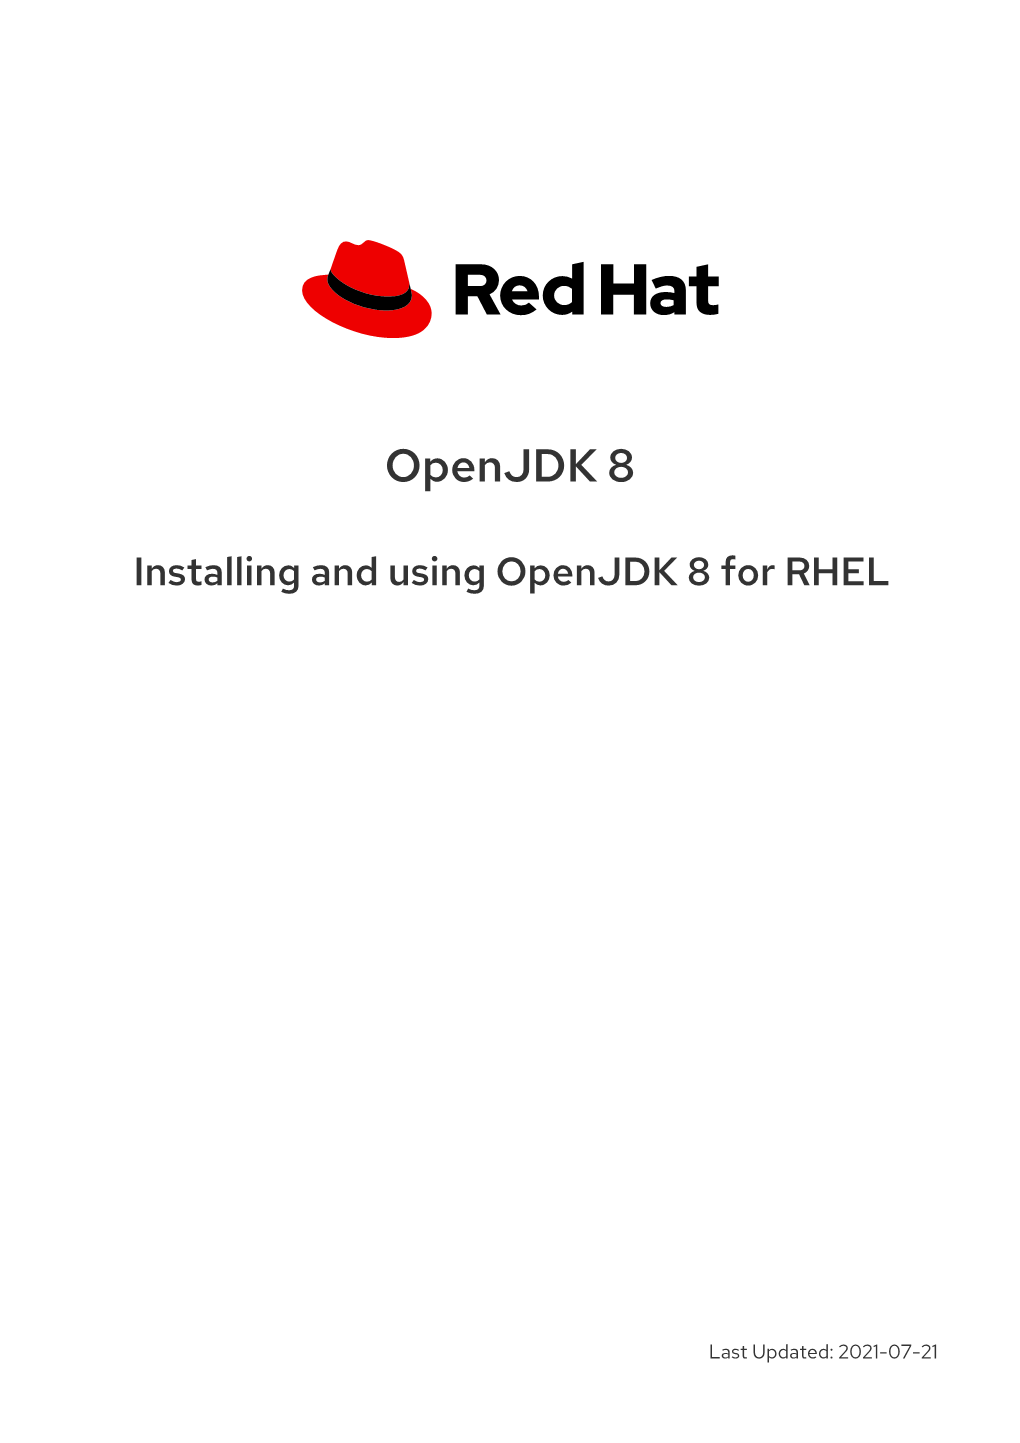 Installing and Using Openjdk 8 for RHEL